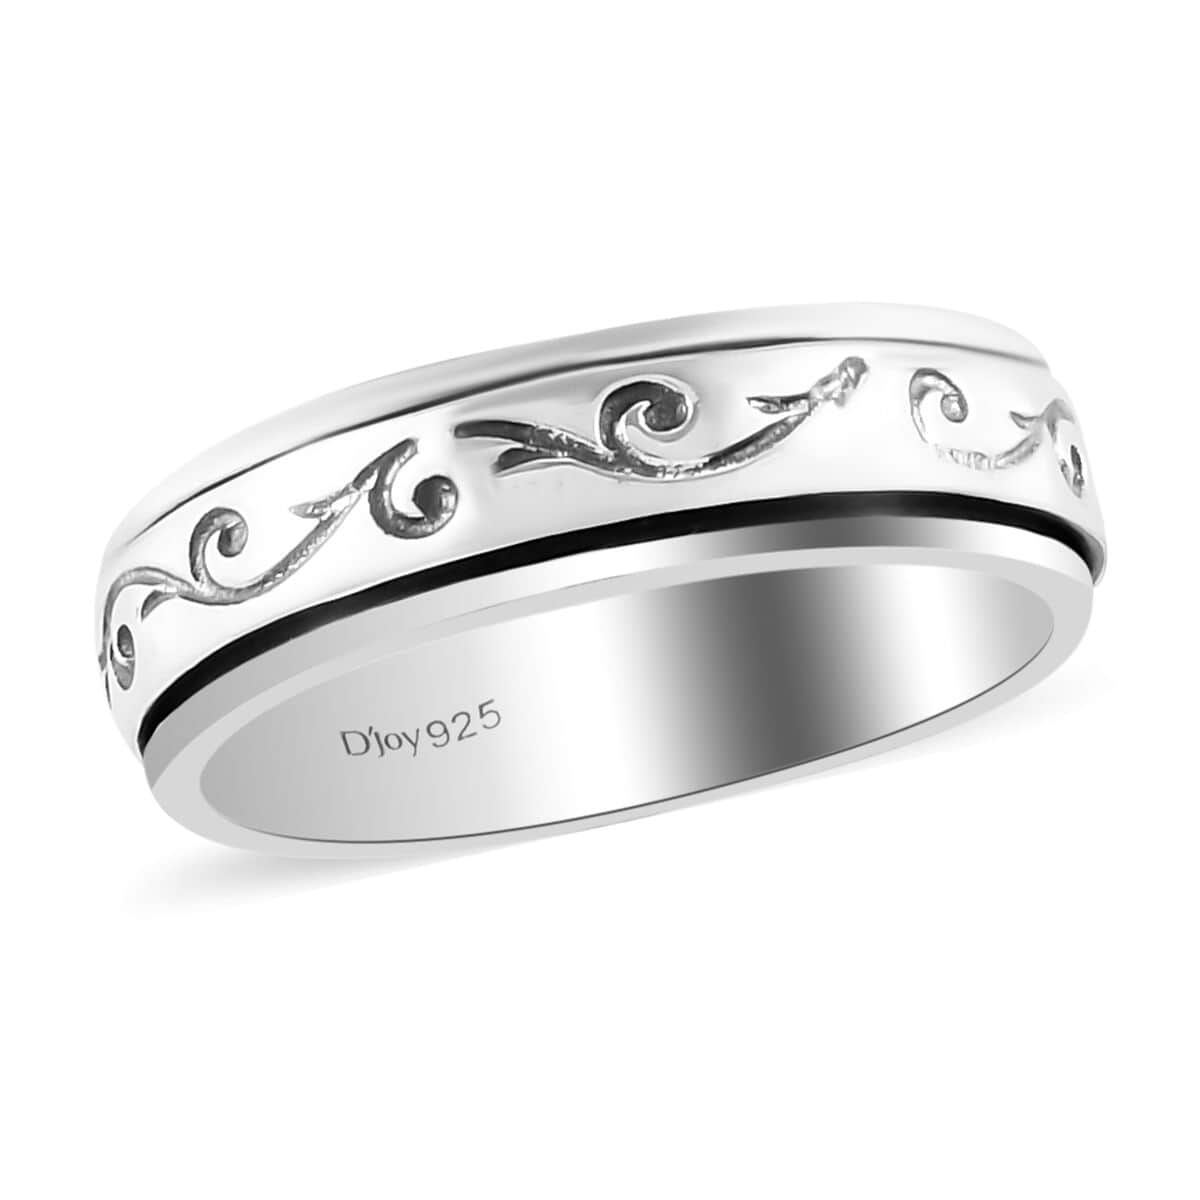 Vines Sterling Silver Spinner Ring, Anxiety Ring for Women, Fidget Rings for Anxiety, Stress Relieving Anxiety Ring (Size 7.0) image number 0